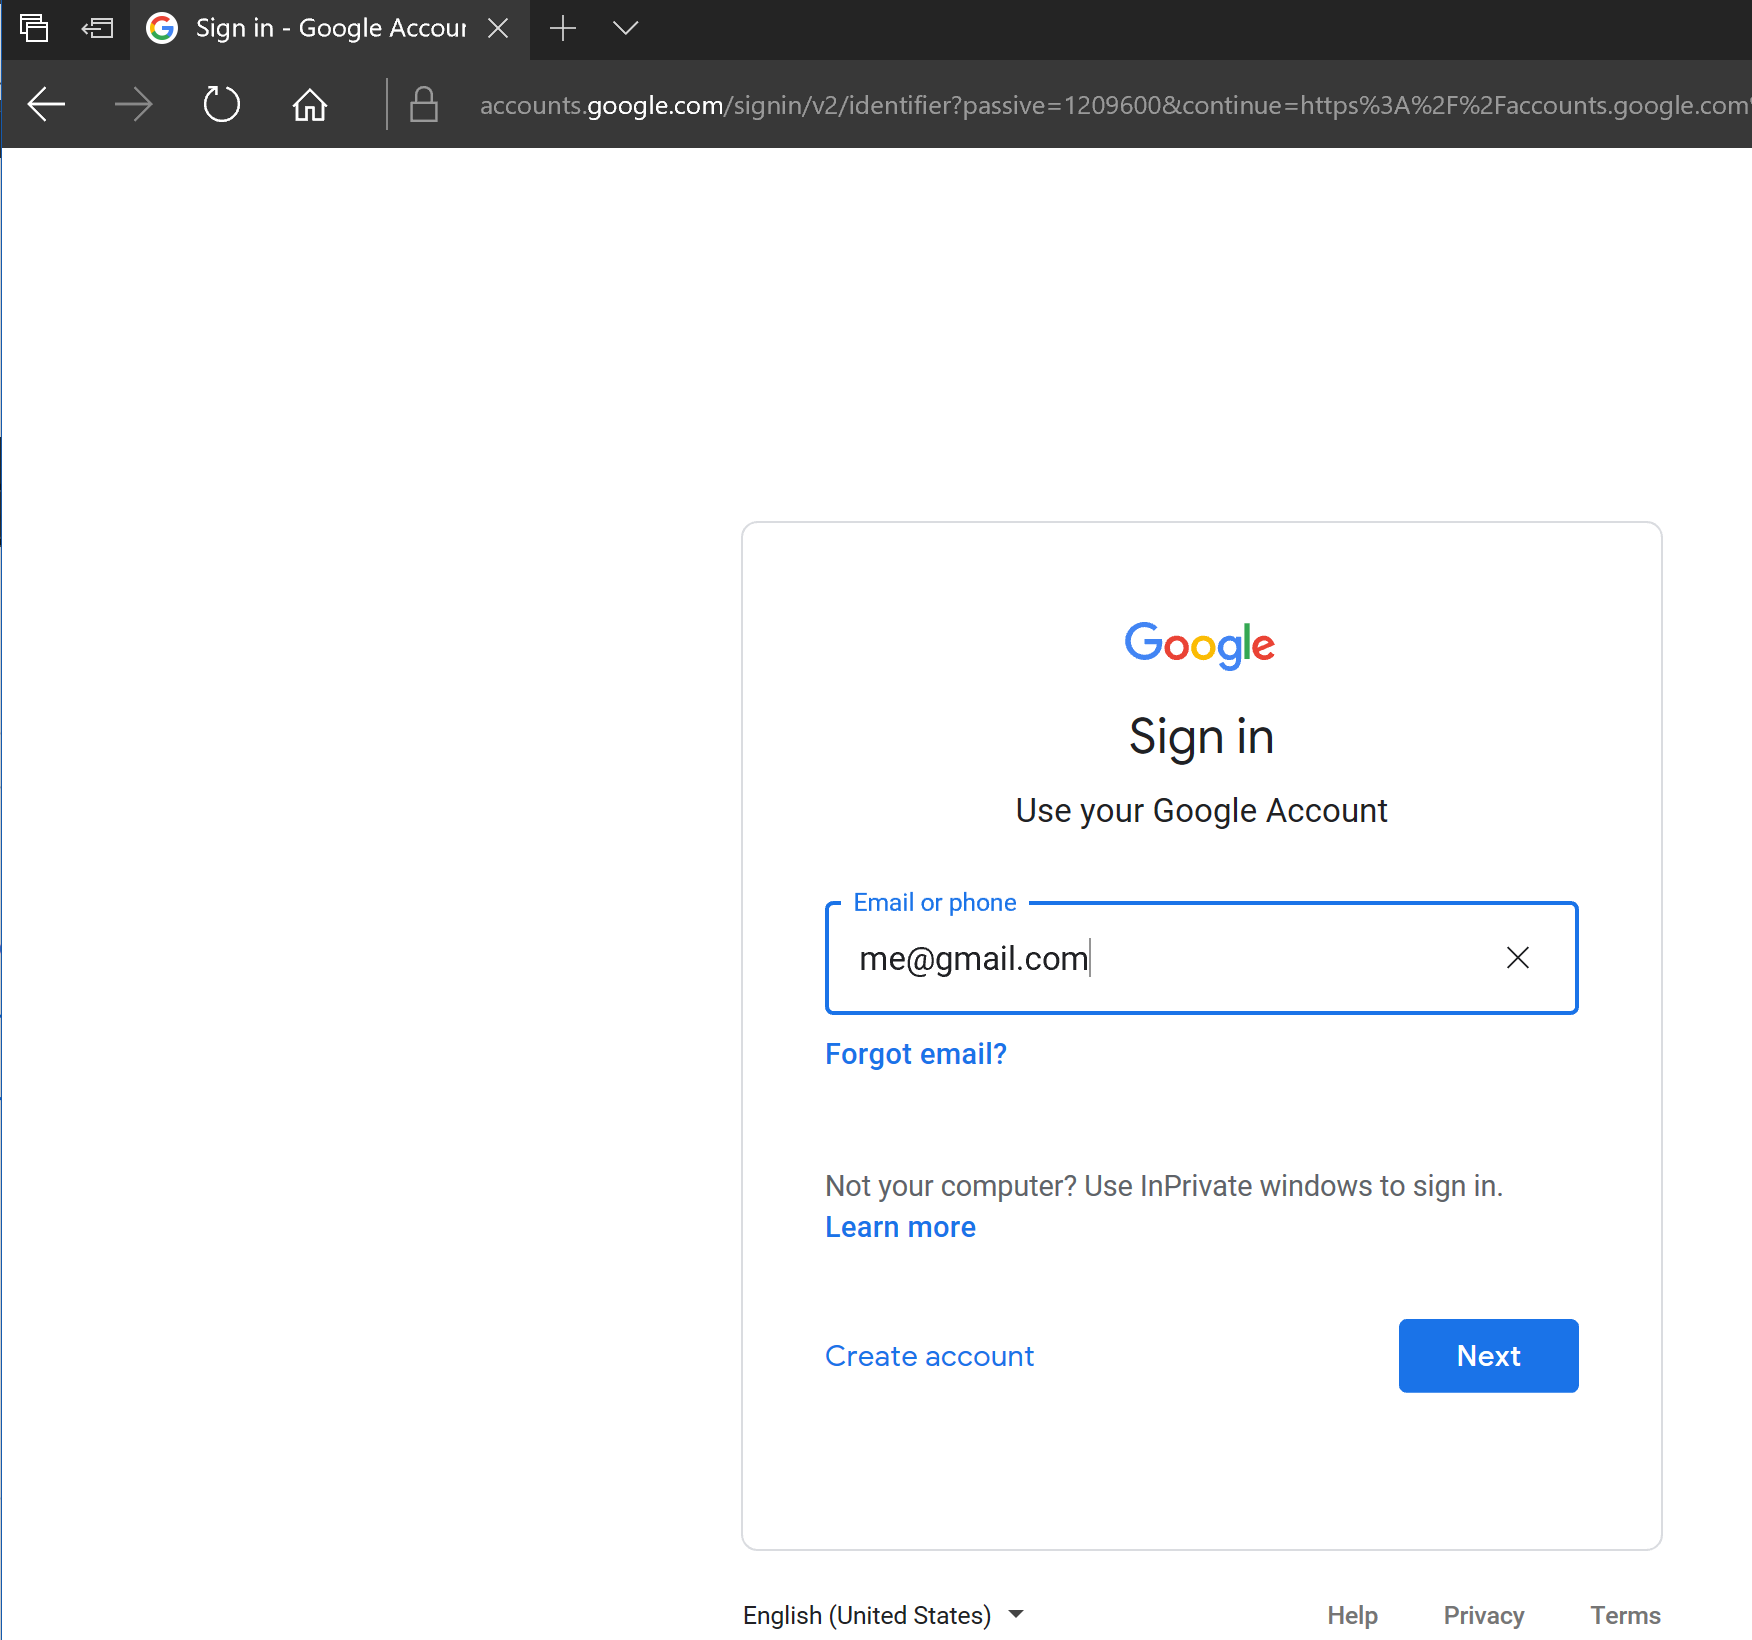 Auth0 sign-in